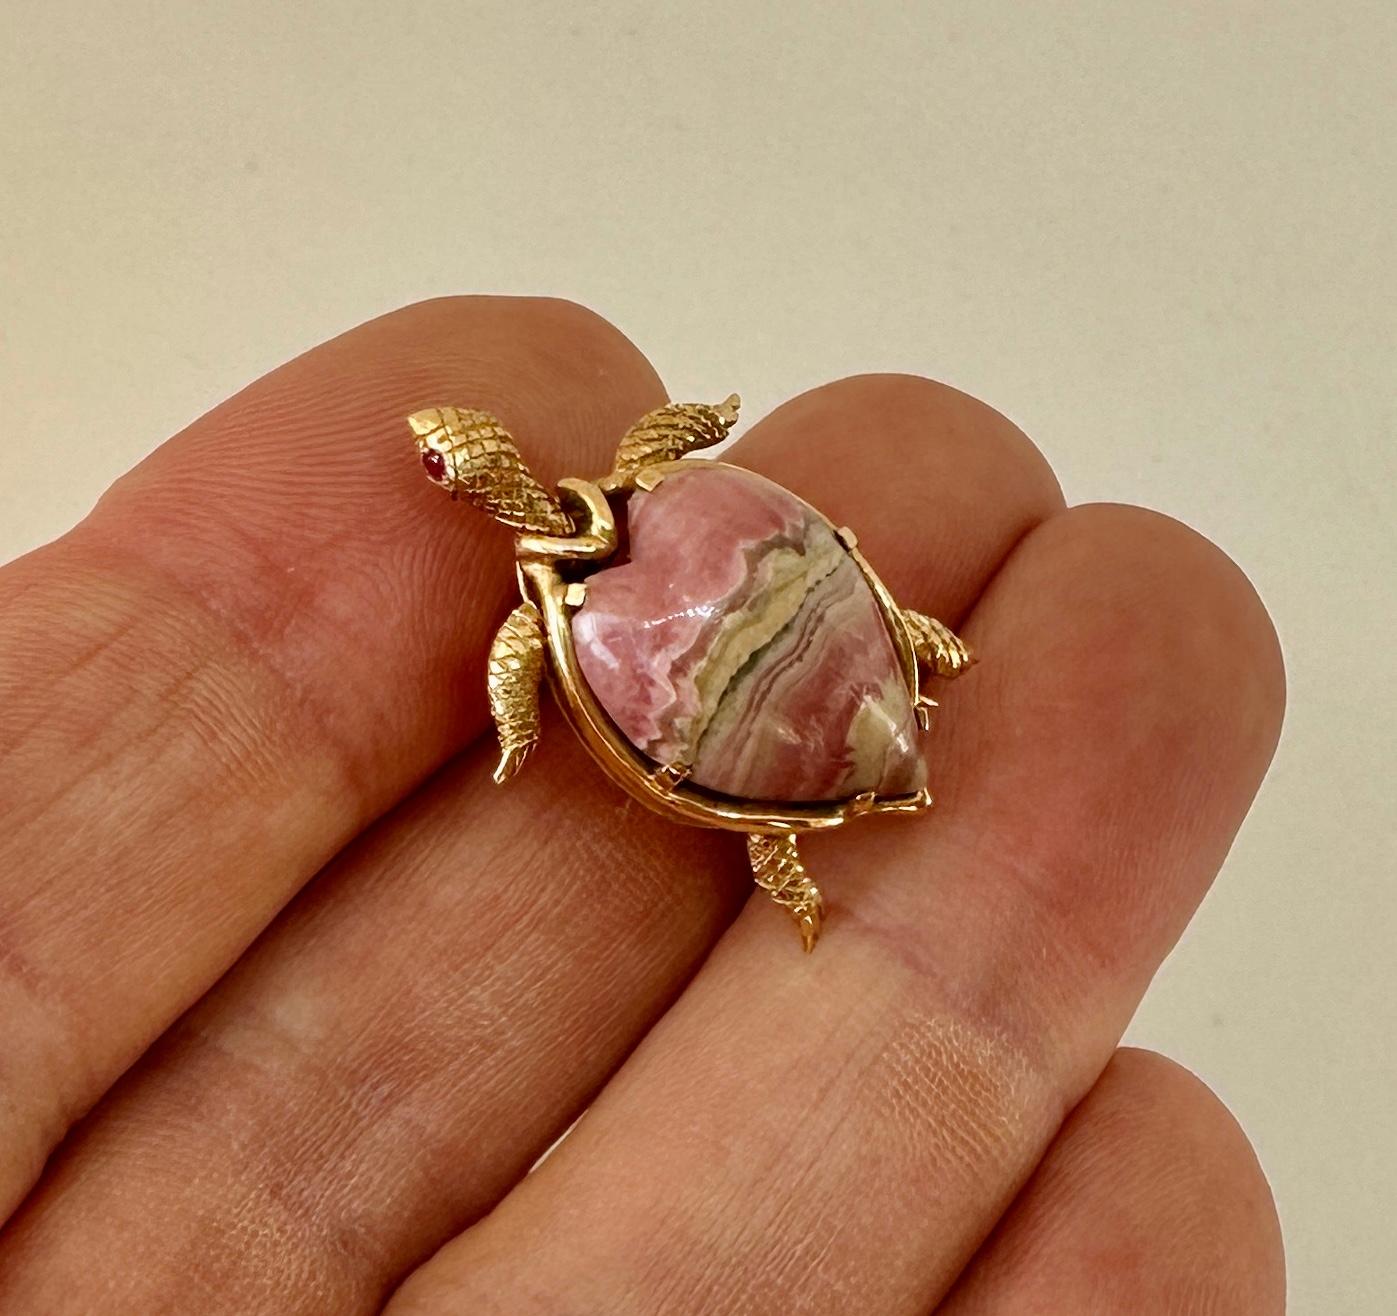 Cabochon Turtle Tortoise Brooch Pin Ruby Pink Rhodochrosite 14 Karat Gold Mary Lou Daves For Sale